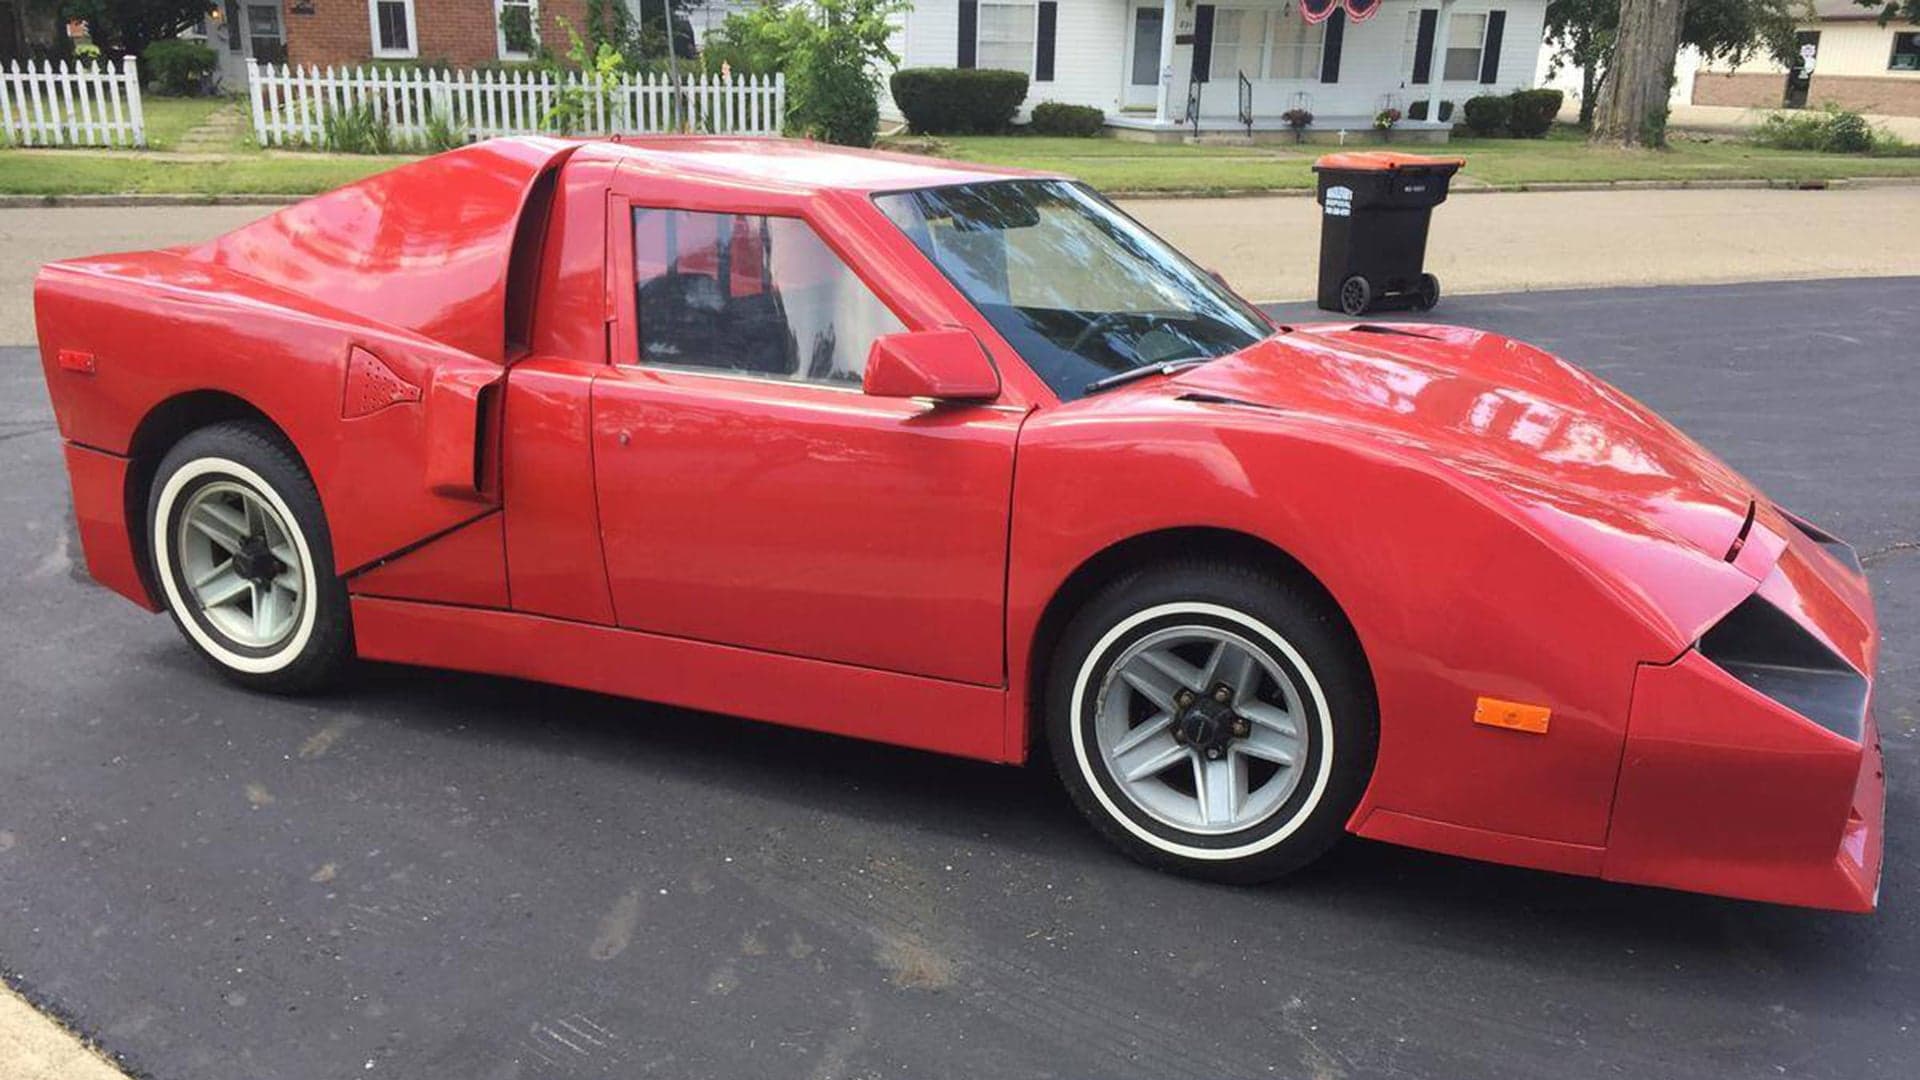 This Pickup-Based, Ferrari-Looking Thing is the Weirdest Custom Car You’ll Ever See